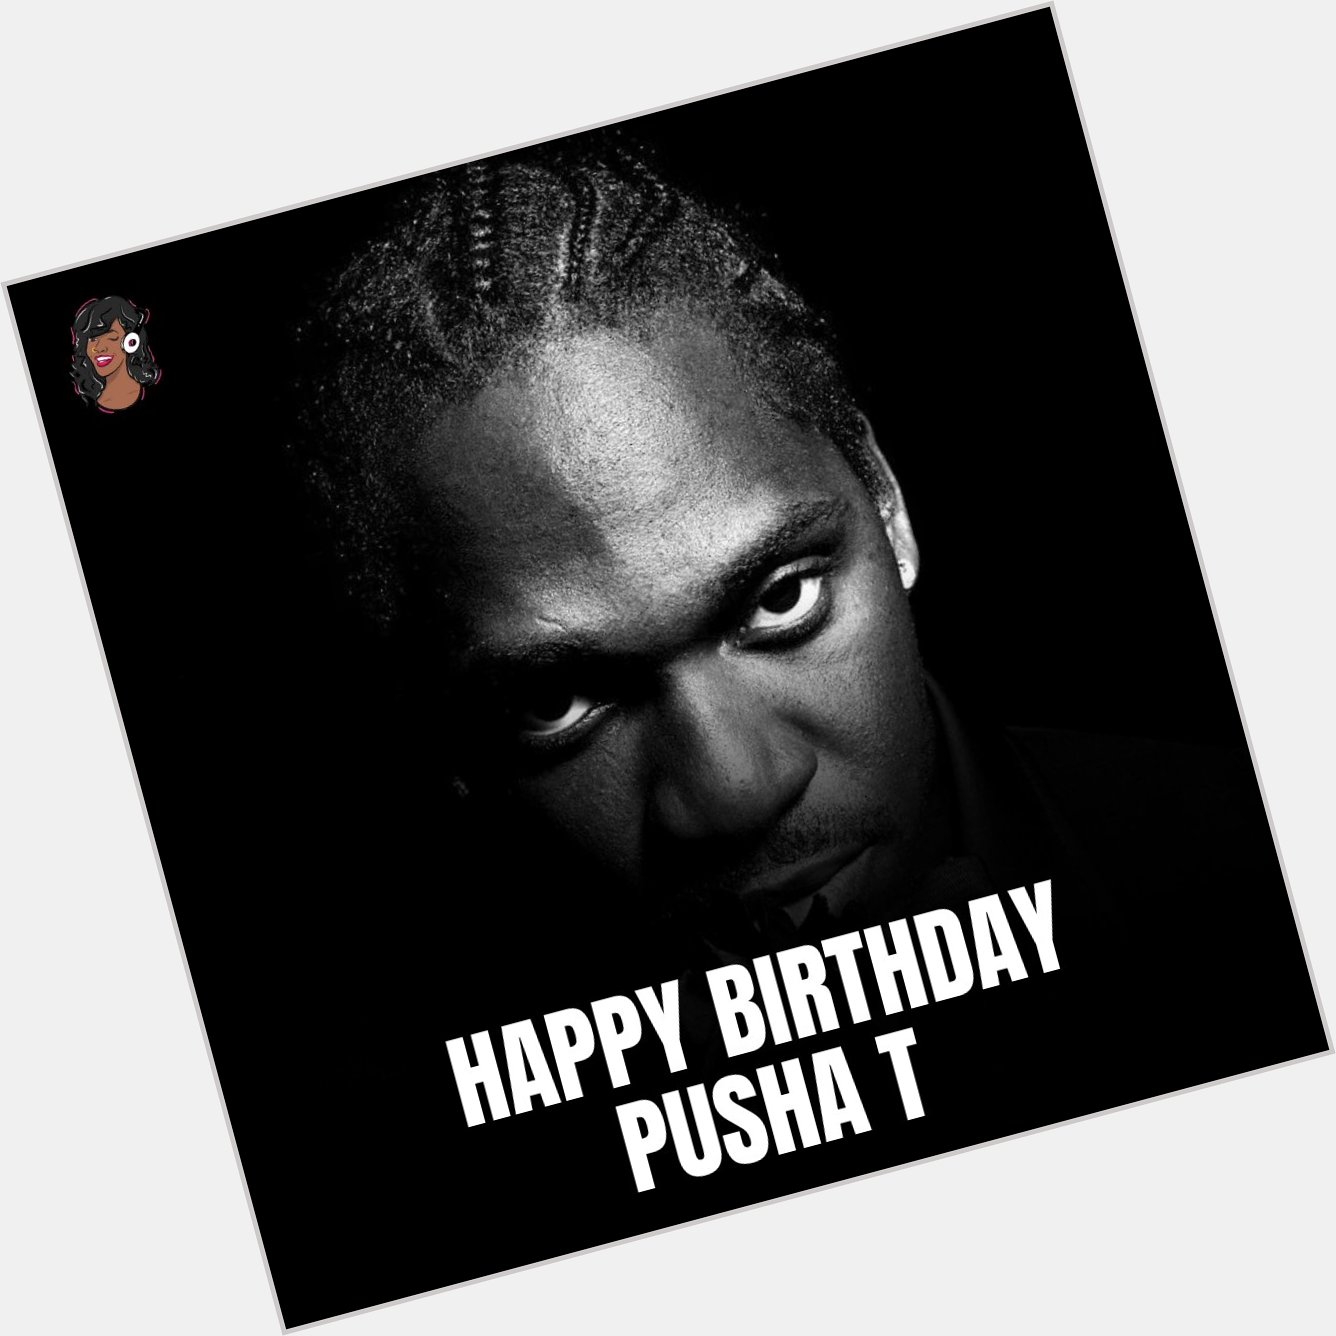 Happy Birthday Pusha T!

What\s your favorite track by the VA rapper? 